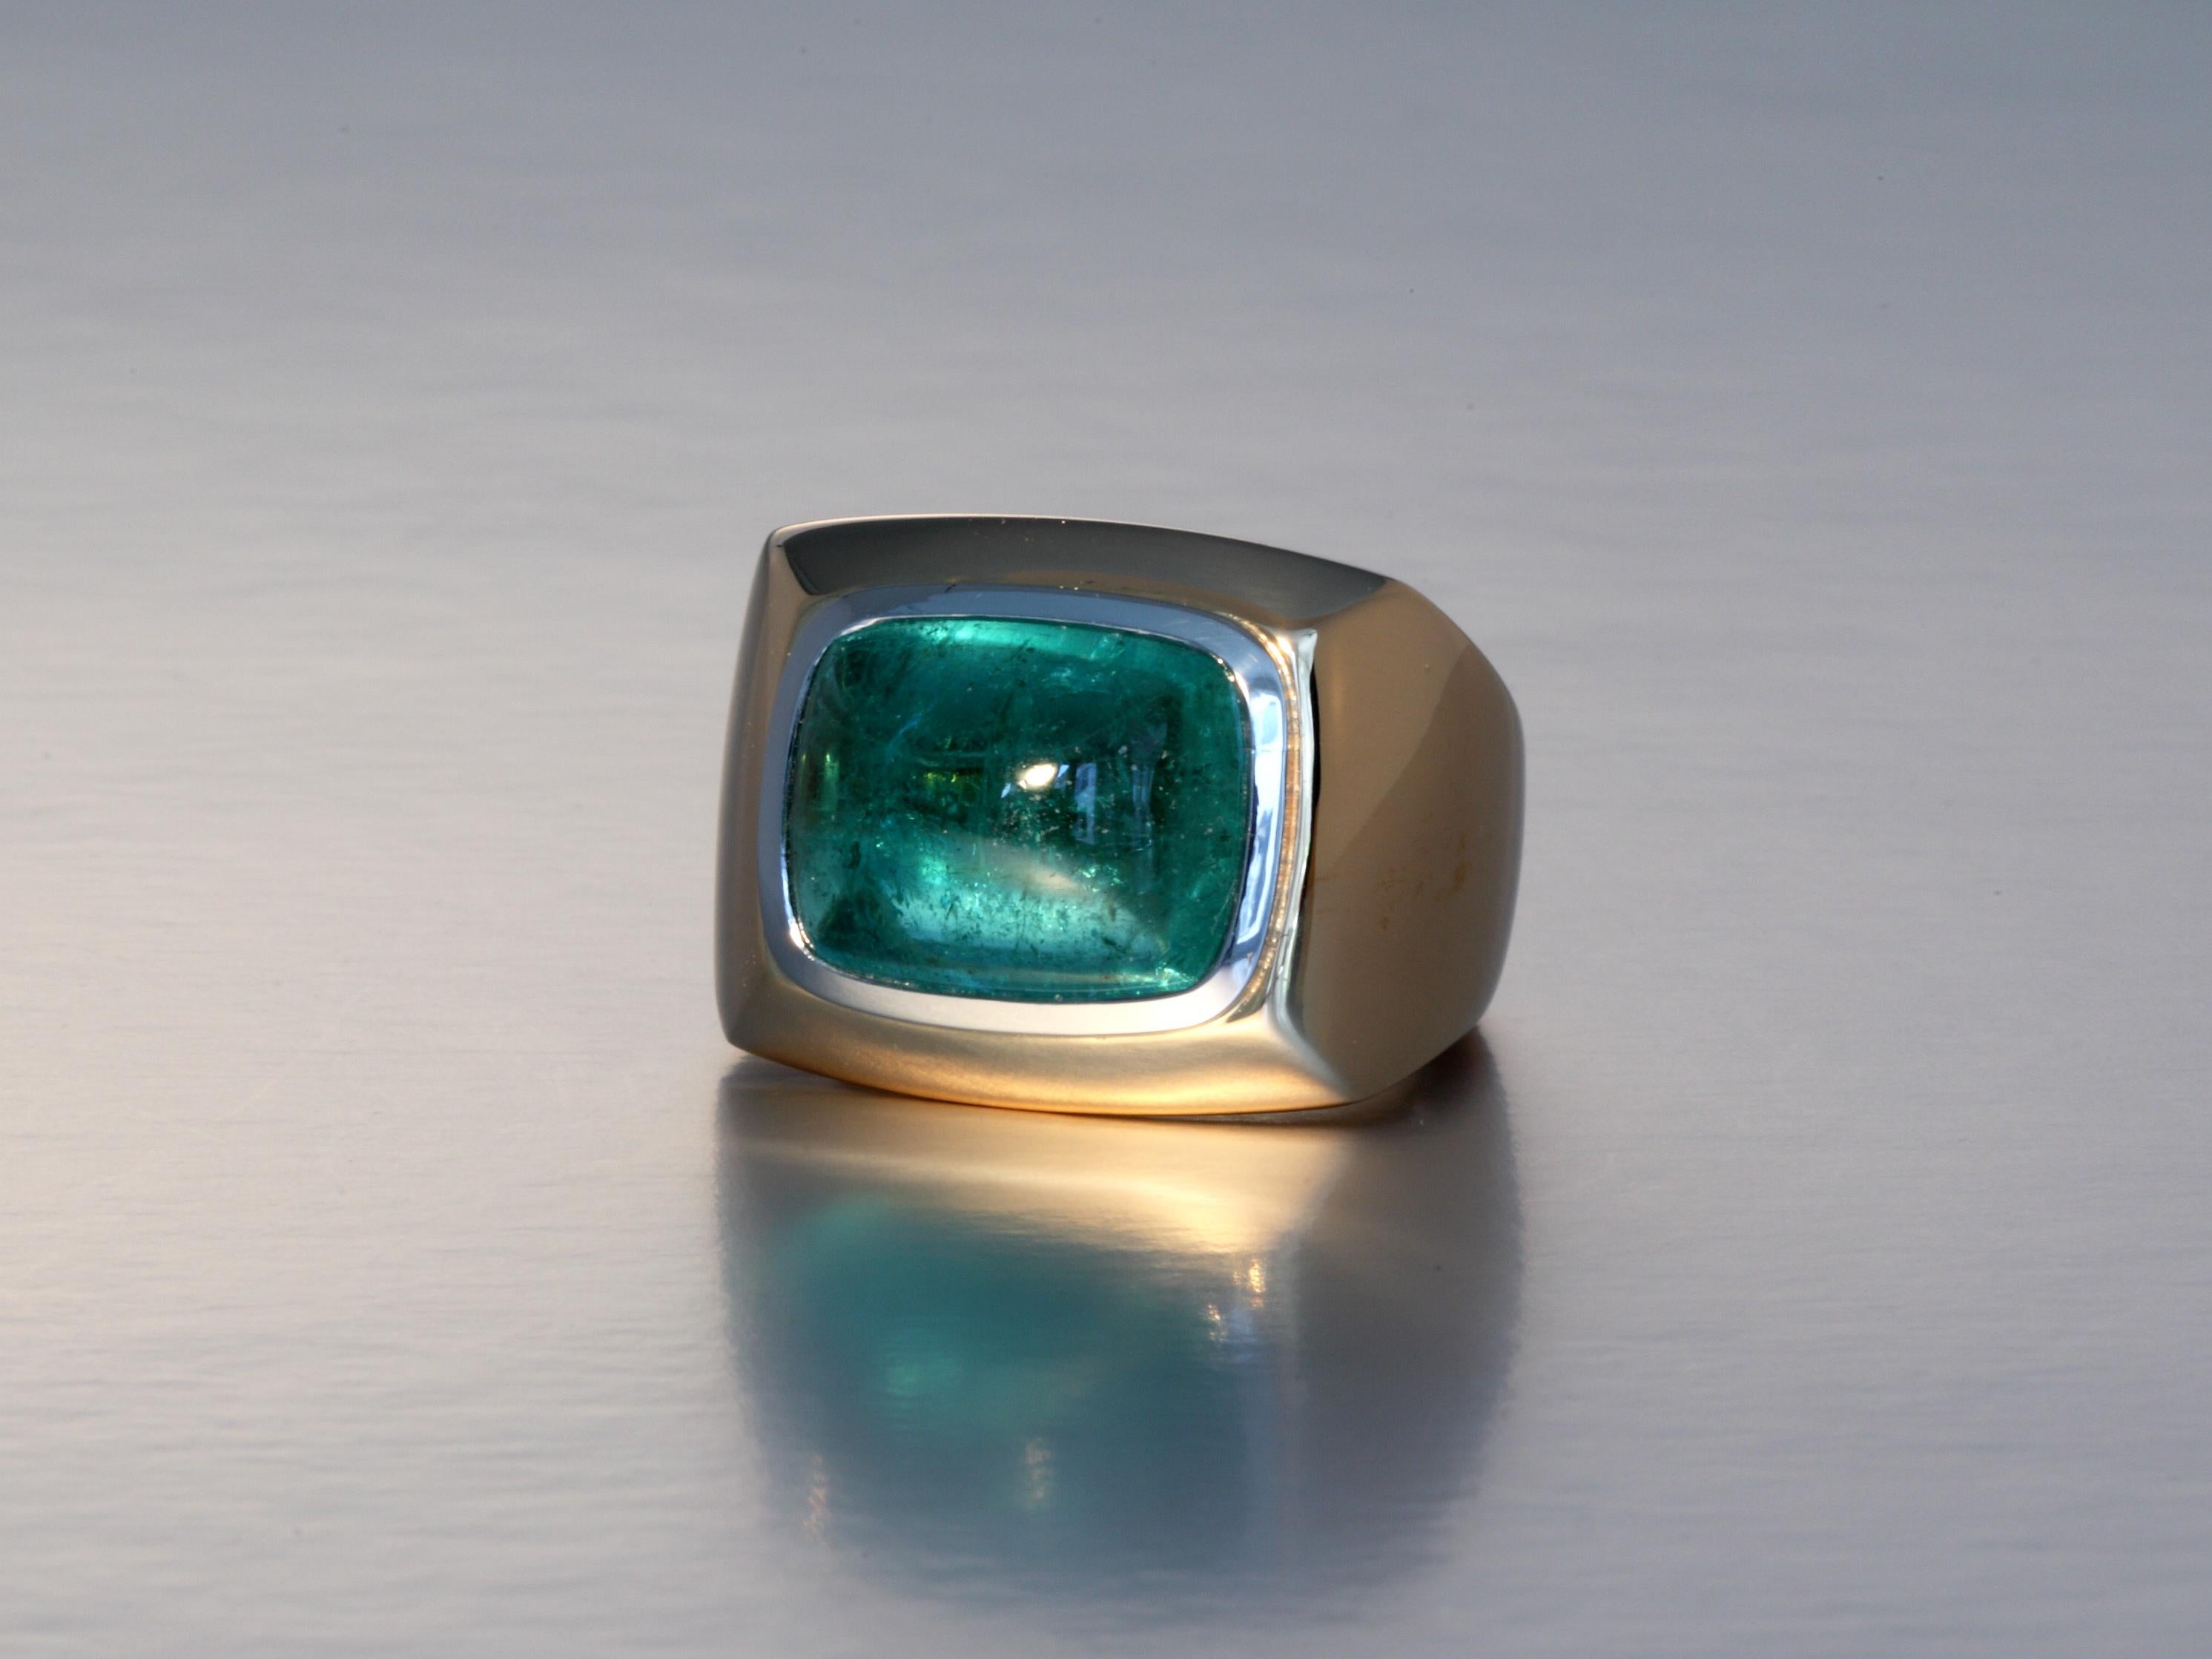 This solid gold ring is set with a mint green sugarloaf Tourmaline of 11.63 carats. The Tourmaline is set in a platinum rim. It is designed and hand made in Zurich, Switzerland by Robert Vogelsang and is a one of a kind piece signed RV.

It is set